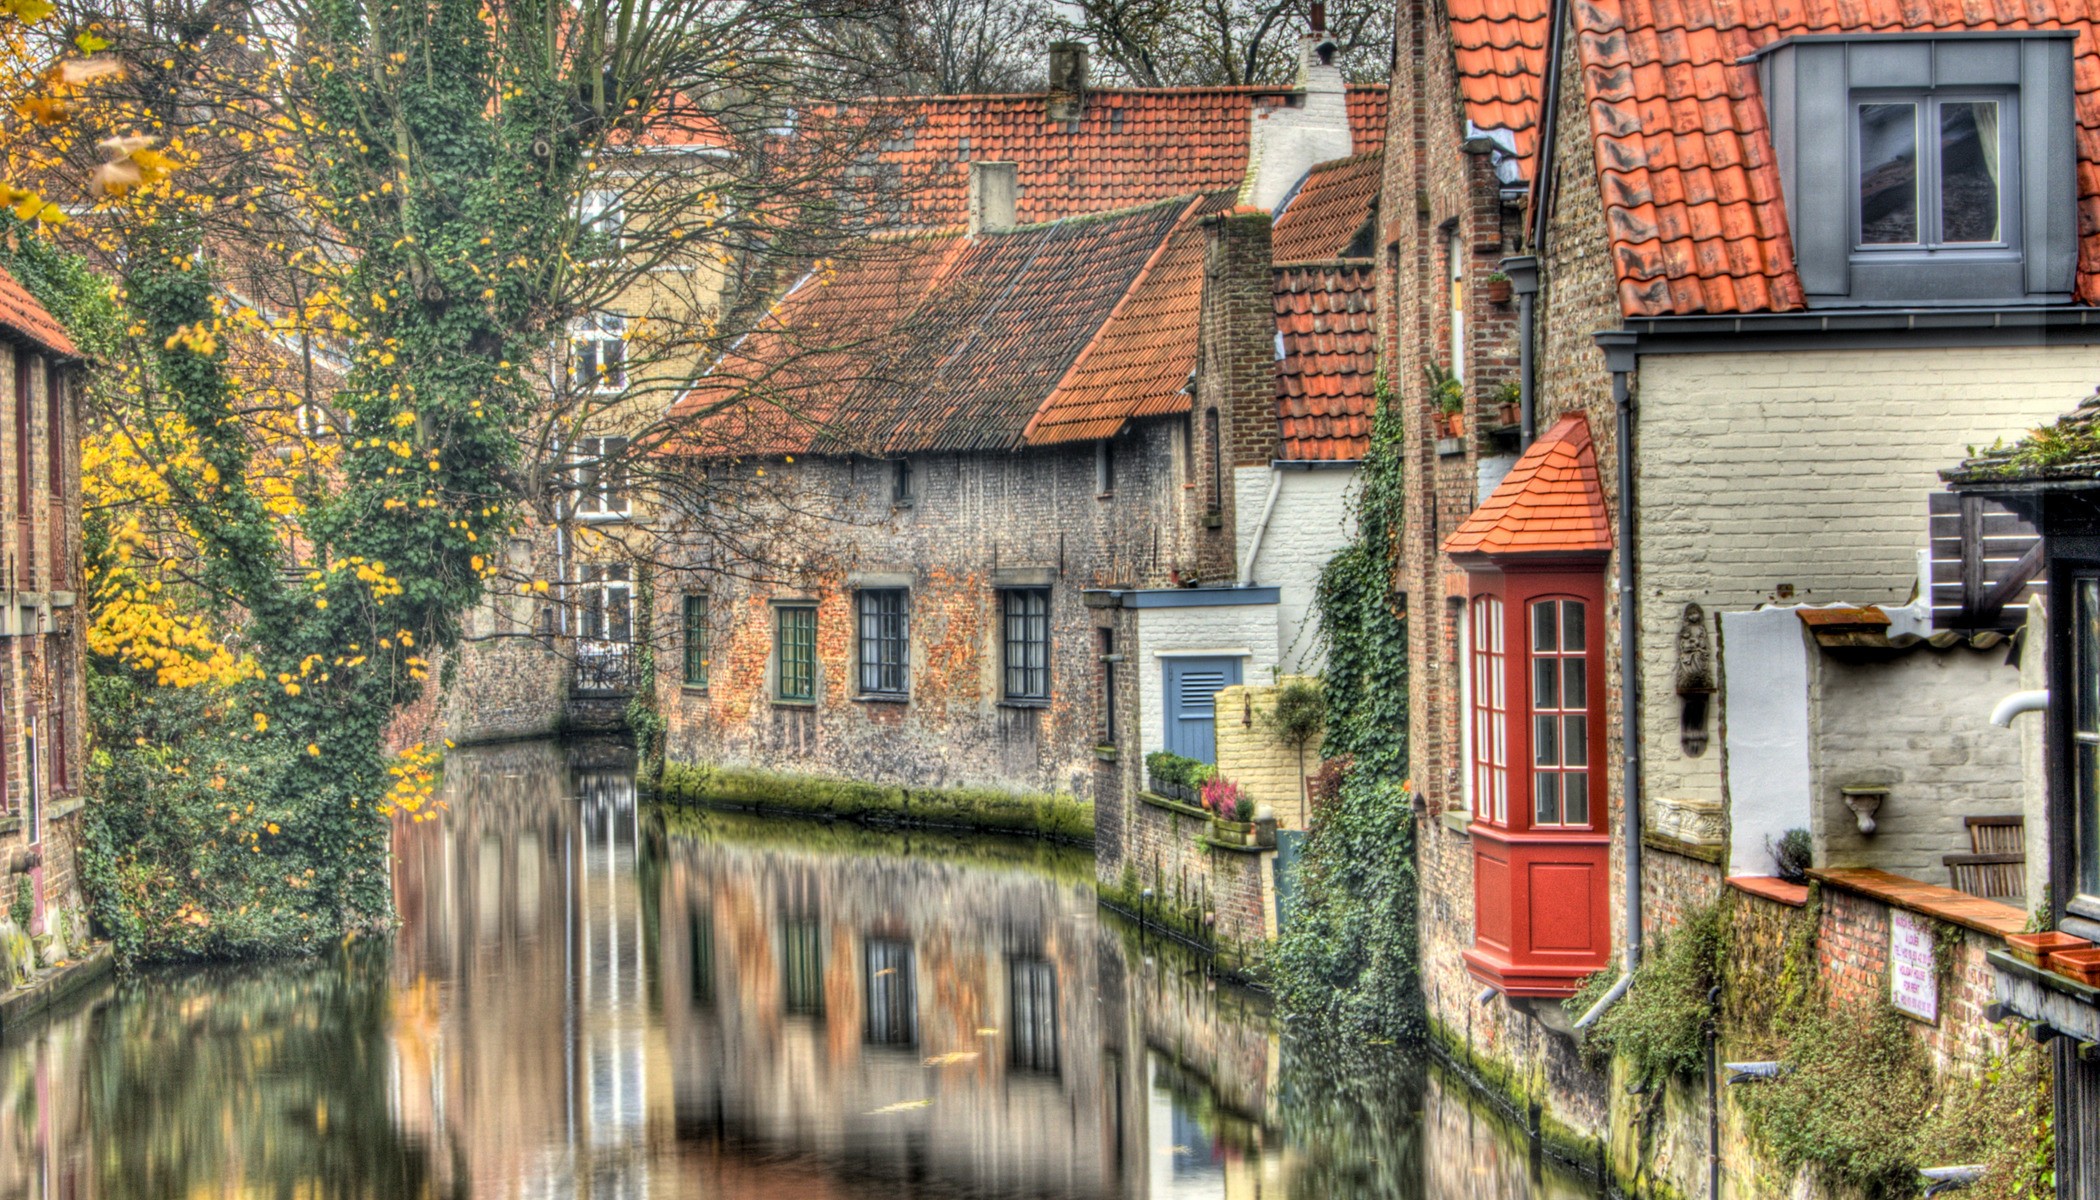 General 2100x1200 house canal old building Bruges Belgium water reflection